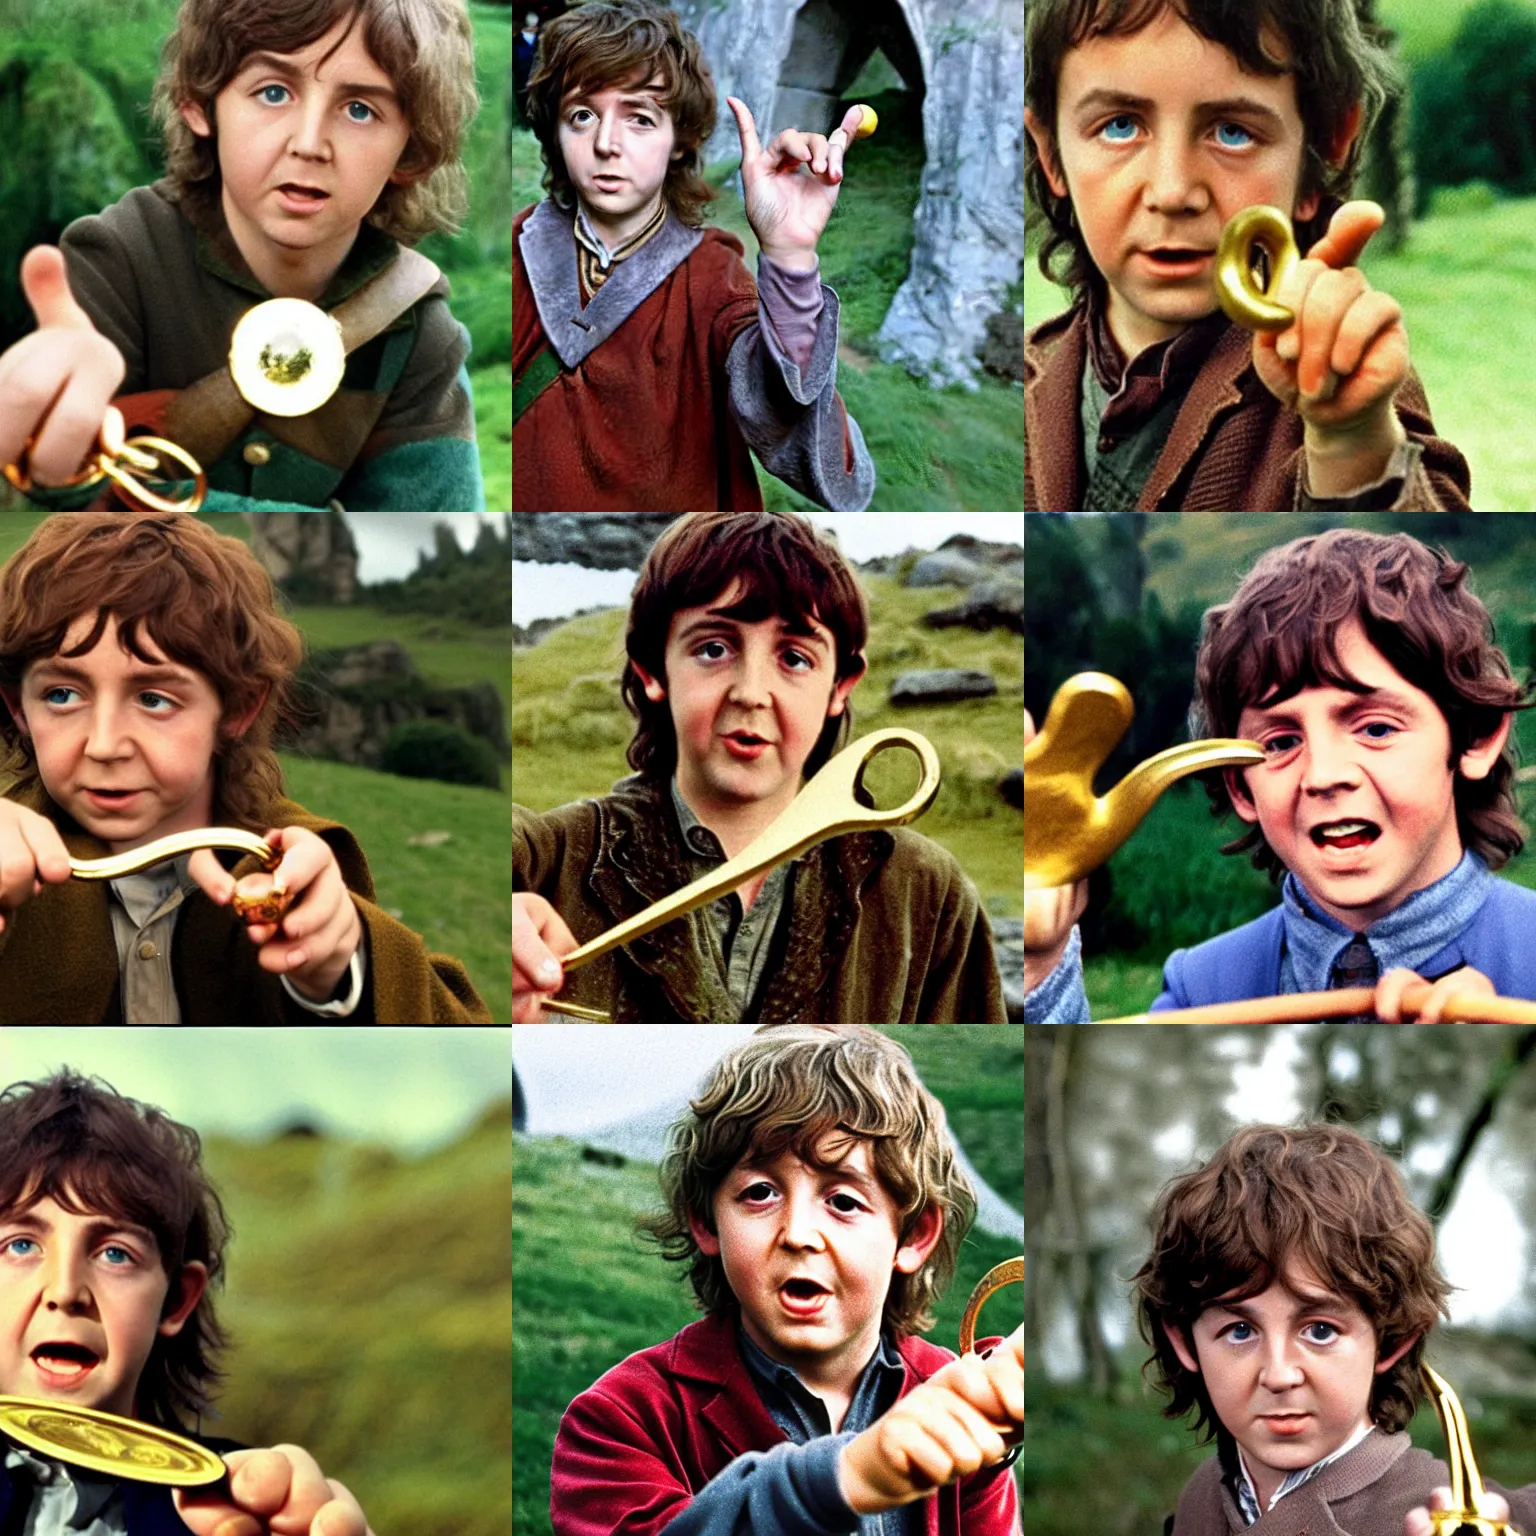 Prompt: a full color still of young Paul McCartney as a hobbit holding a golden ring in The Lord of the Rings, 1967